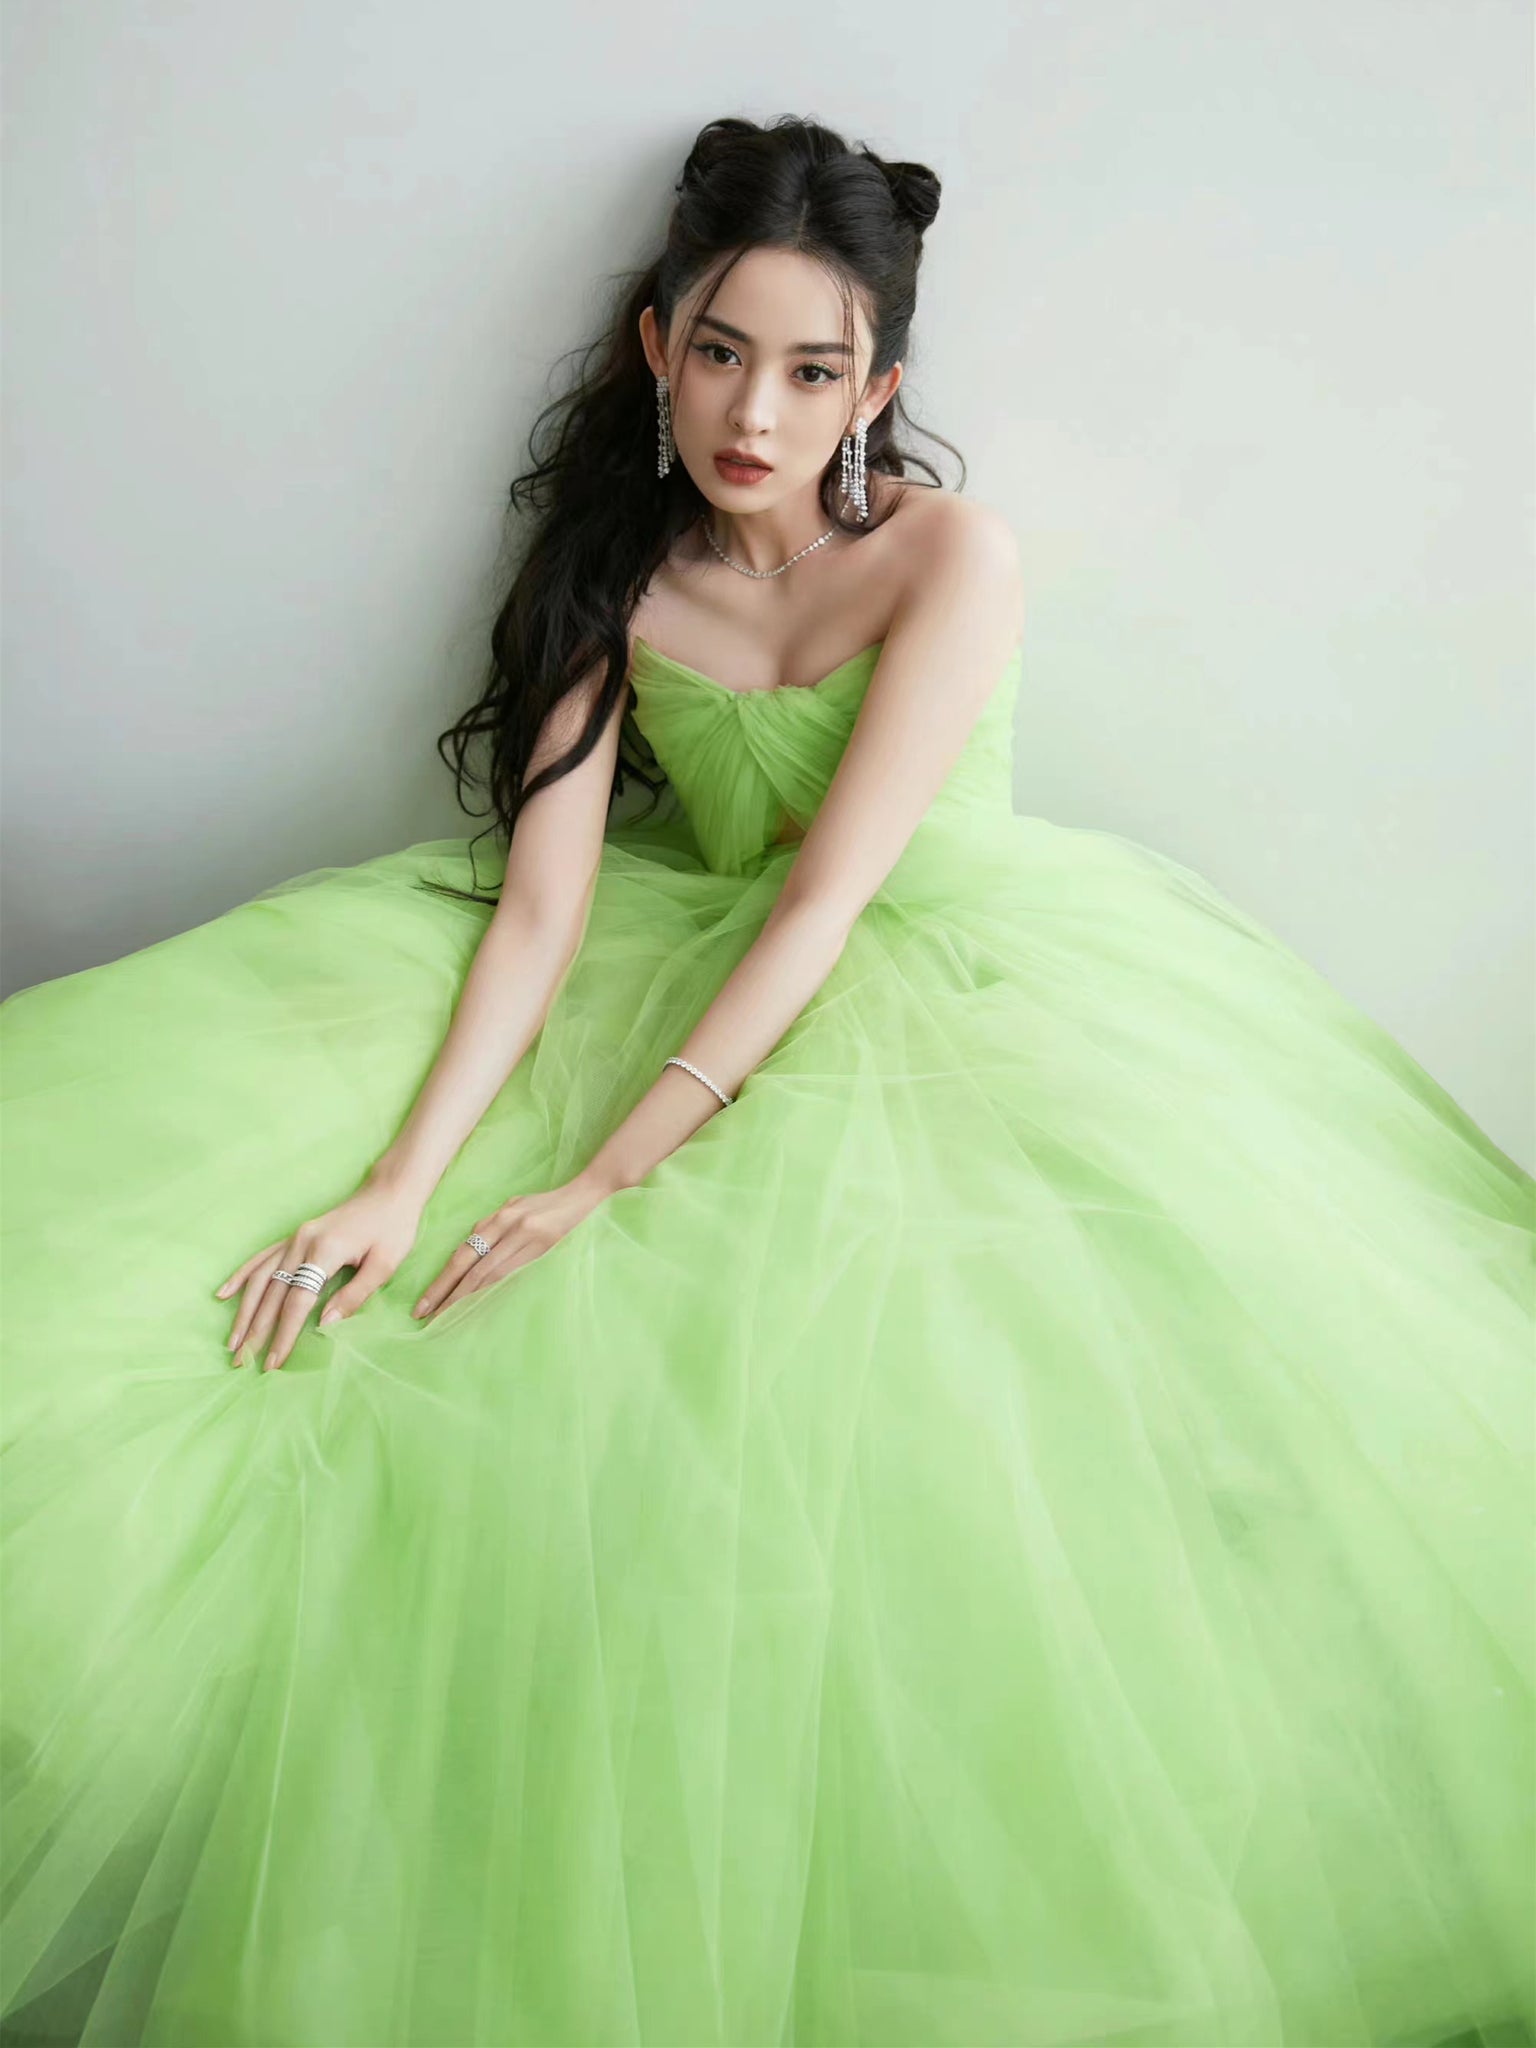 Sweetheart A-line Green Tulle Prom Dresses, Fluffy Prom Dresses, Celebrity Dresses, Affordable Prom Dresses